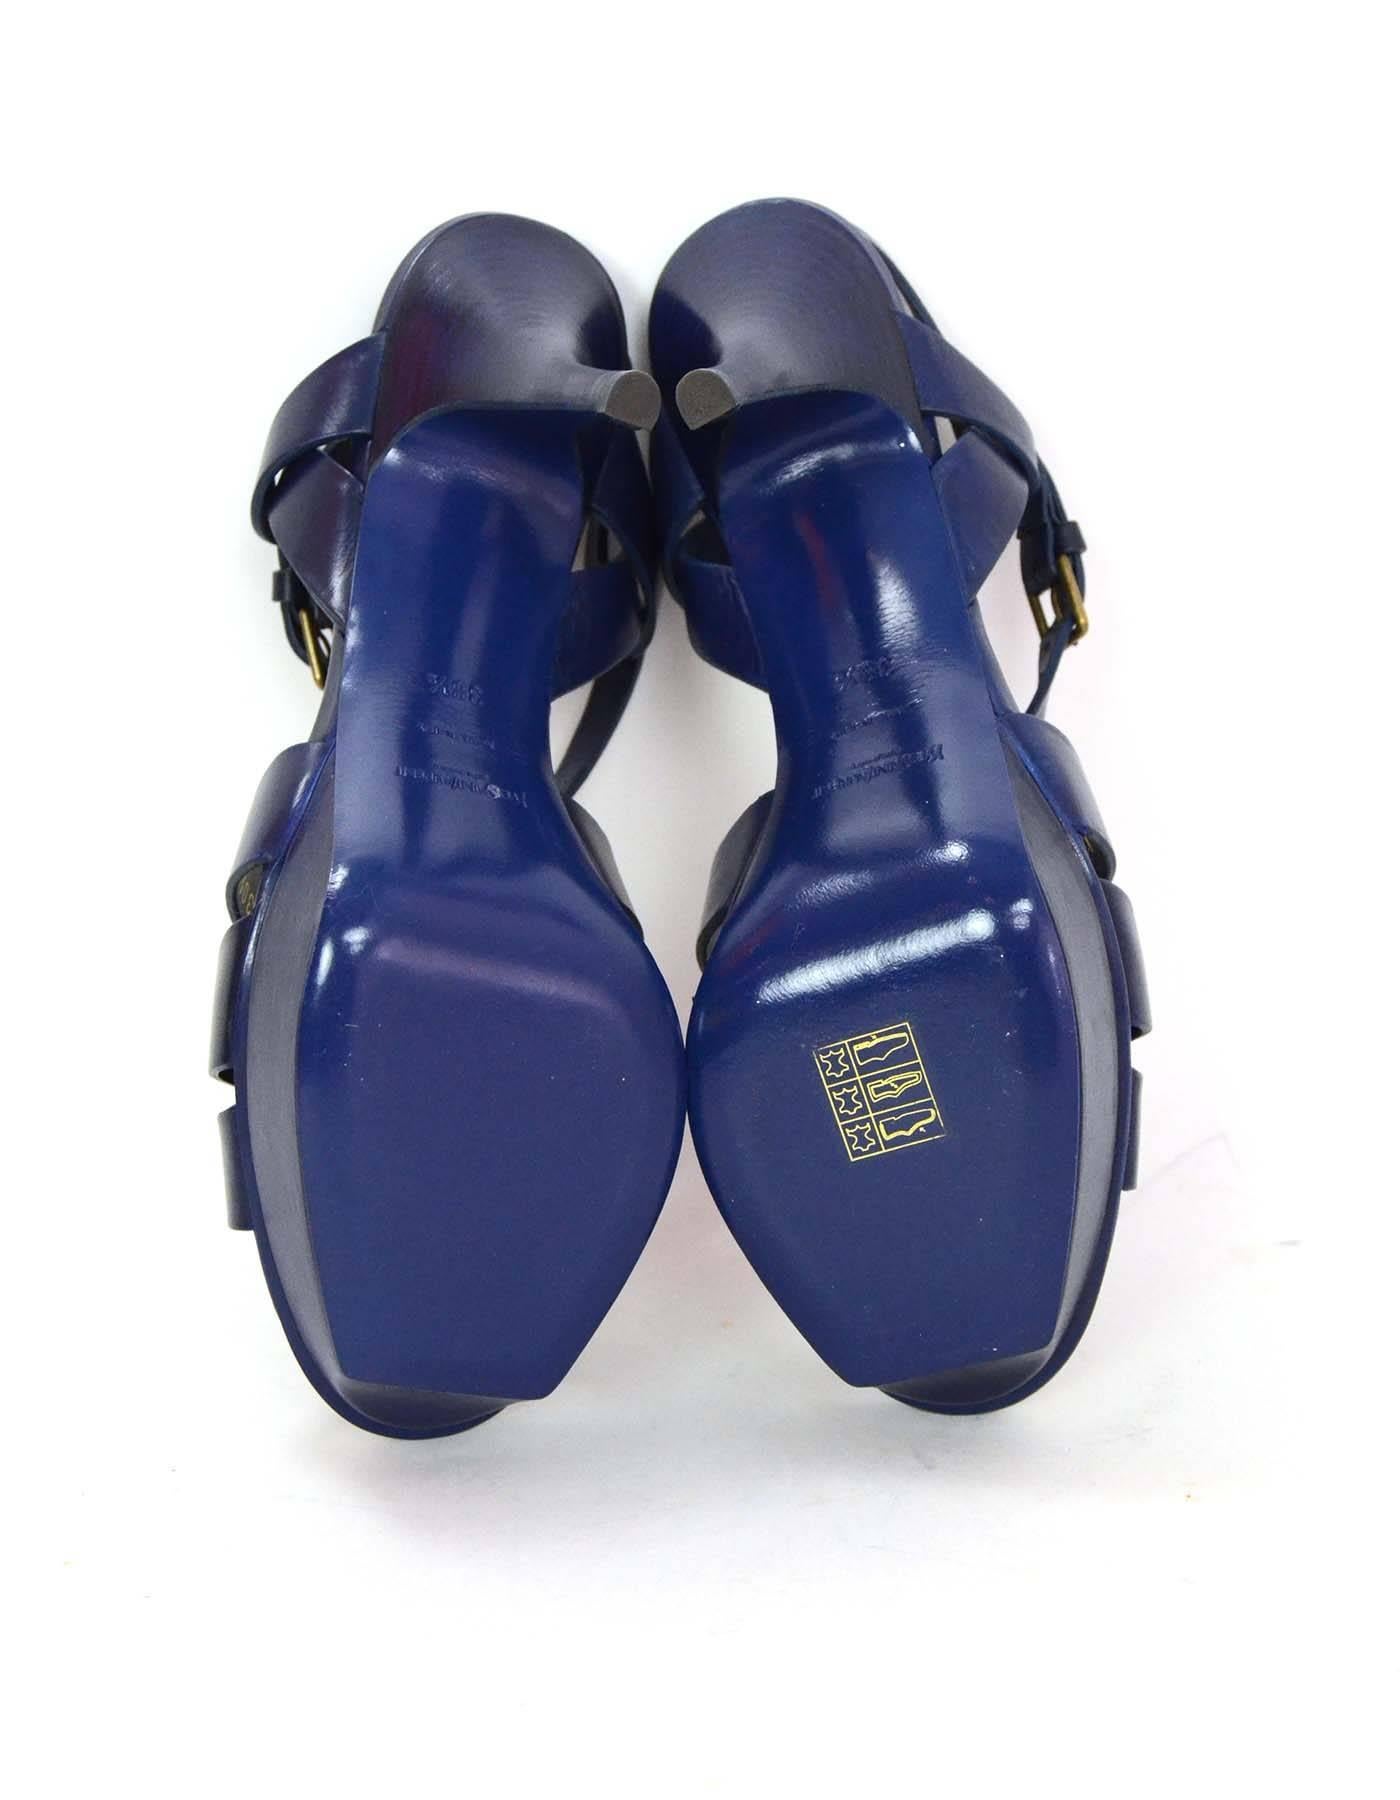 Yves Saint Laurent YSL Navy Leather Tribute 75 Strappy Sandals sz 38.5 1